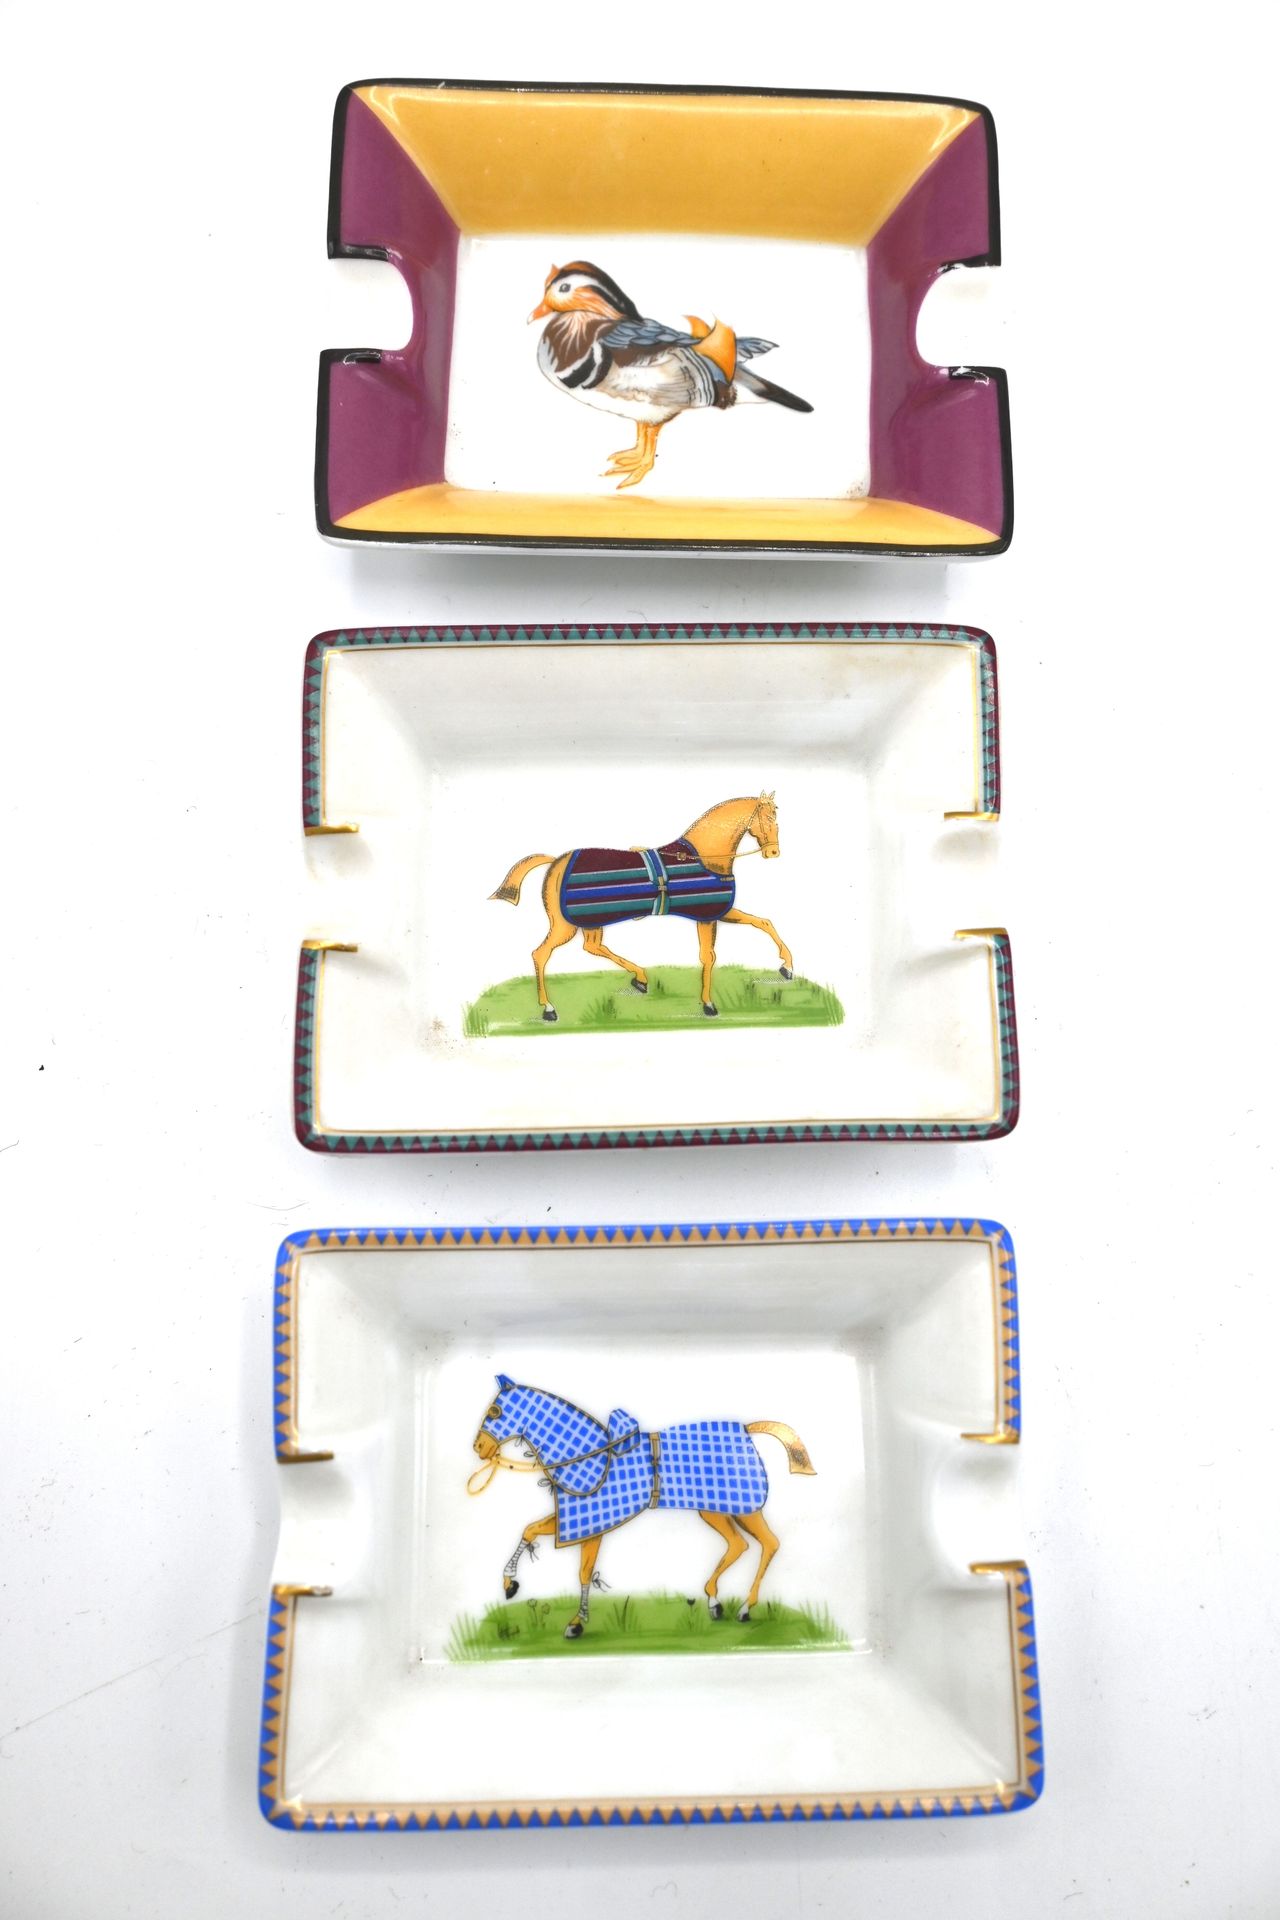 Null HERMES. Three porcelain ashtrays size S, two showing horses and one showing&hellip;